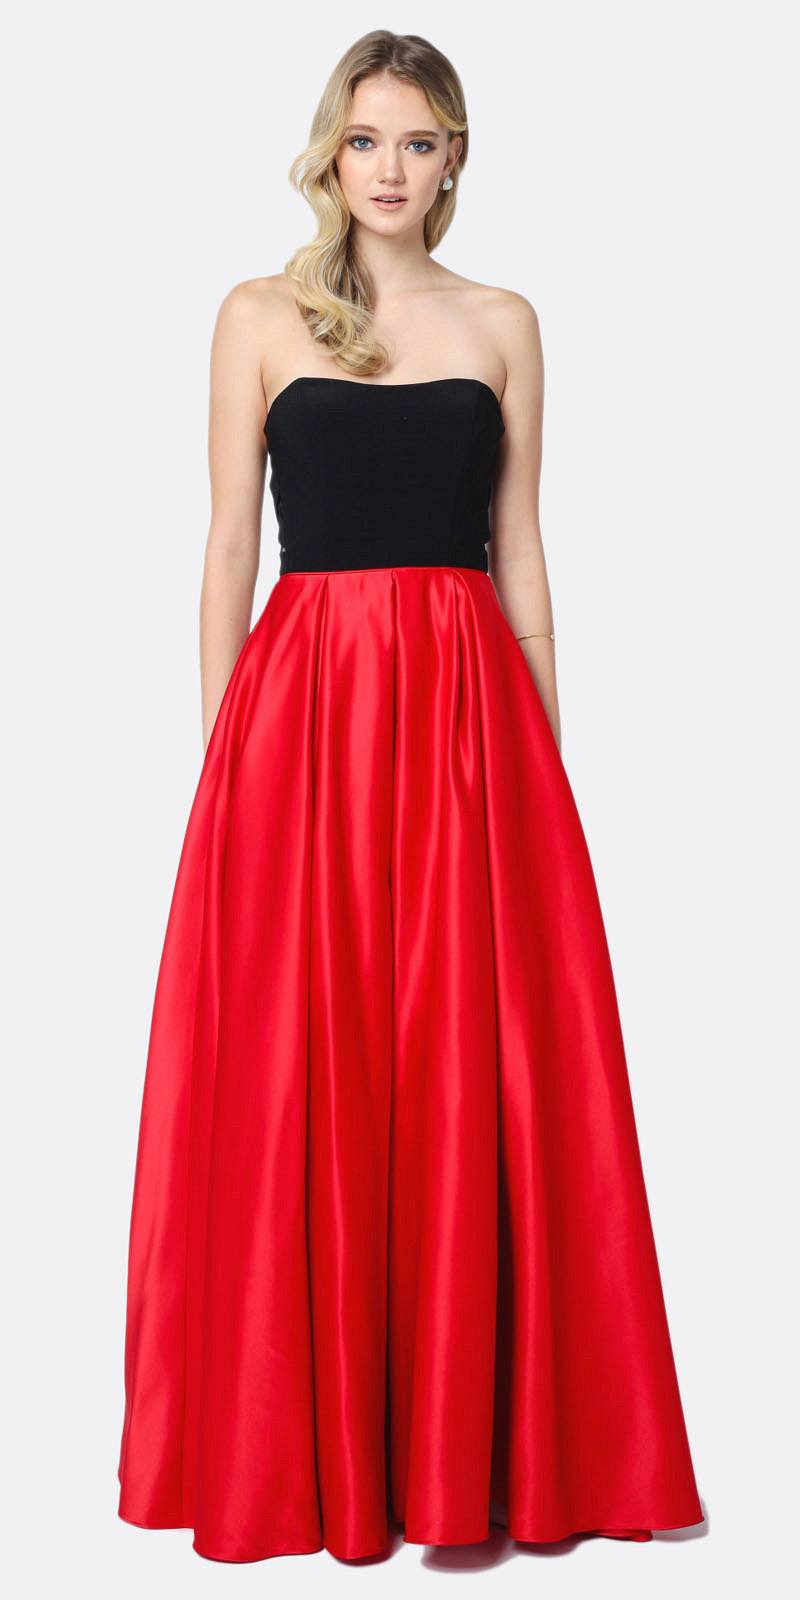 Juliet 694 Two Tone Sweetheart Ball Gown Style Prom Dress Black/Red